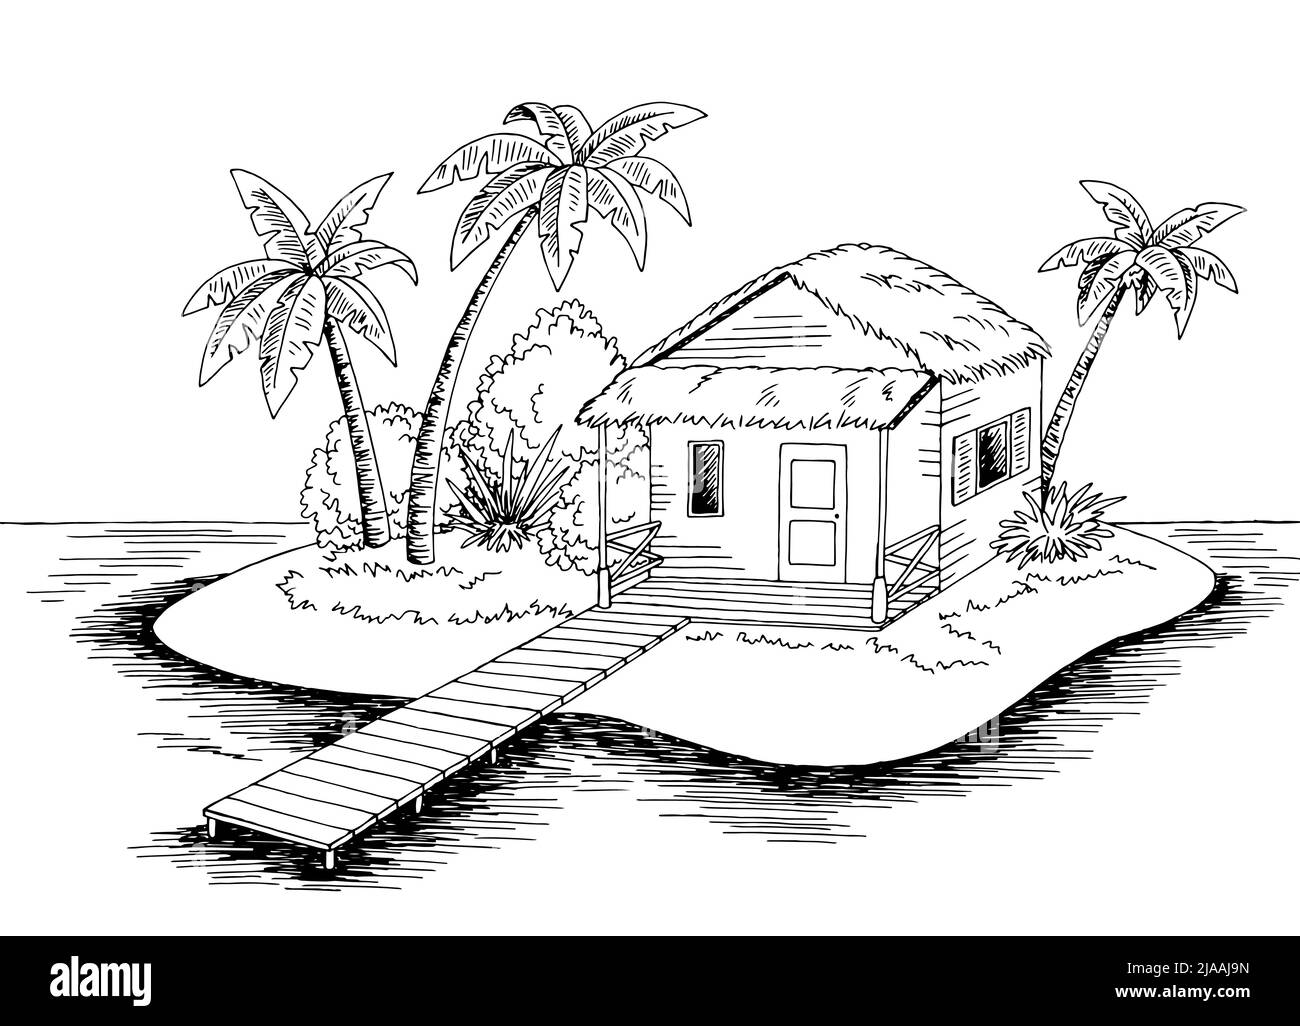 Island house beach graphic black white isolated landscape sketch illustration vector Stock Vector